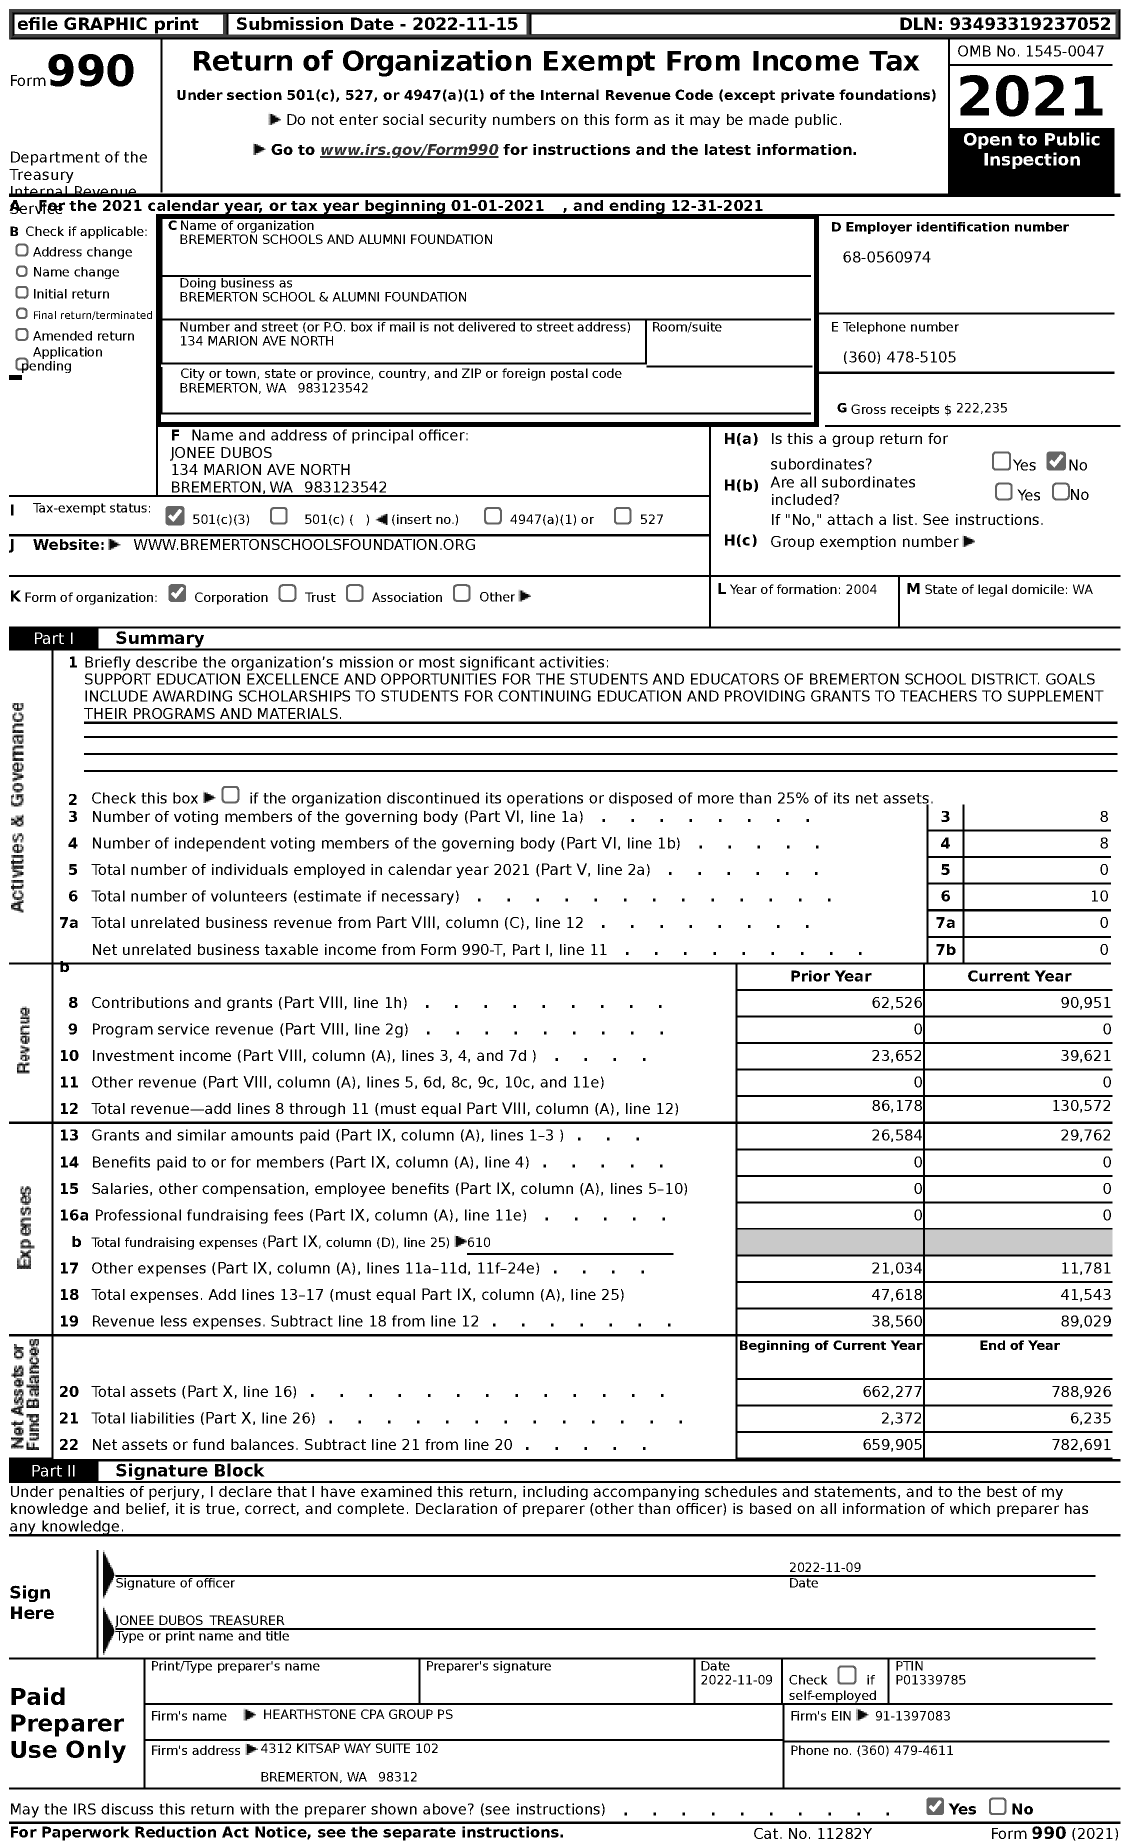 Image of first page of 2021 Form 990 for Bremerton Schools and Alumni Foundation